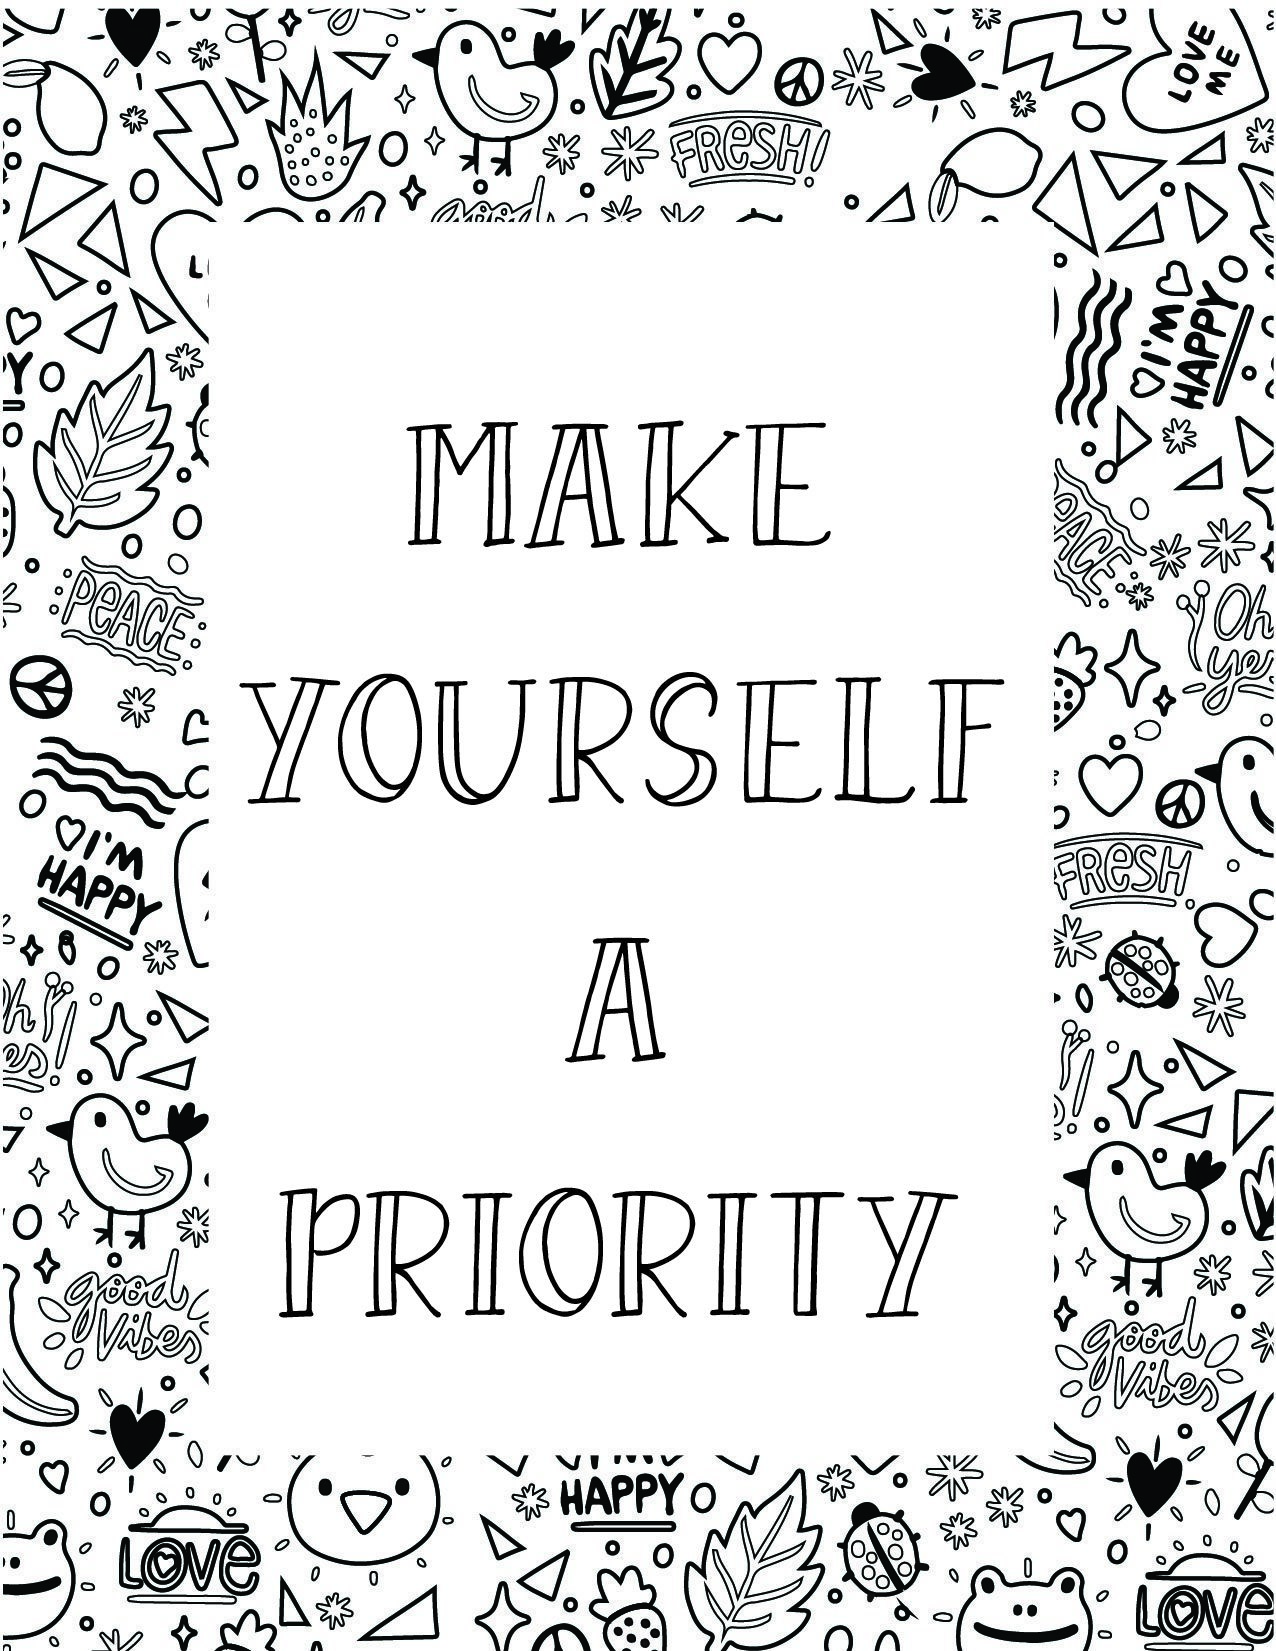 20 Best Printable Inspirational Quote Coloring Pages   World of ...